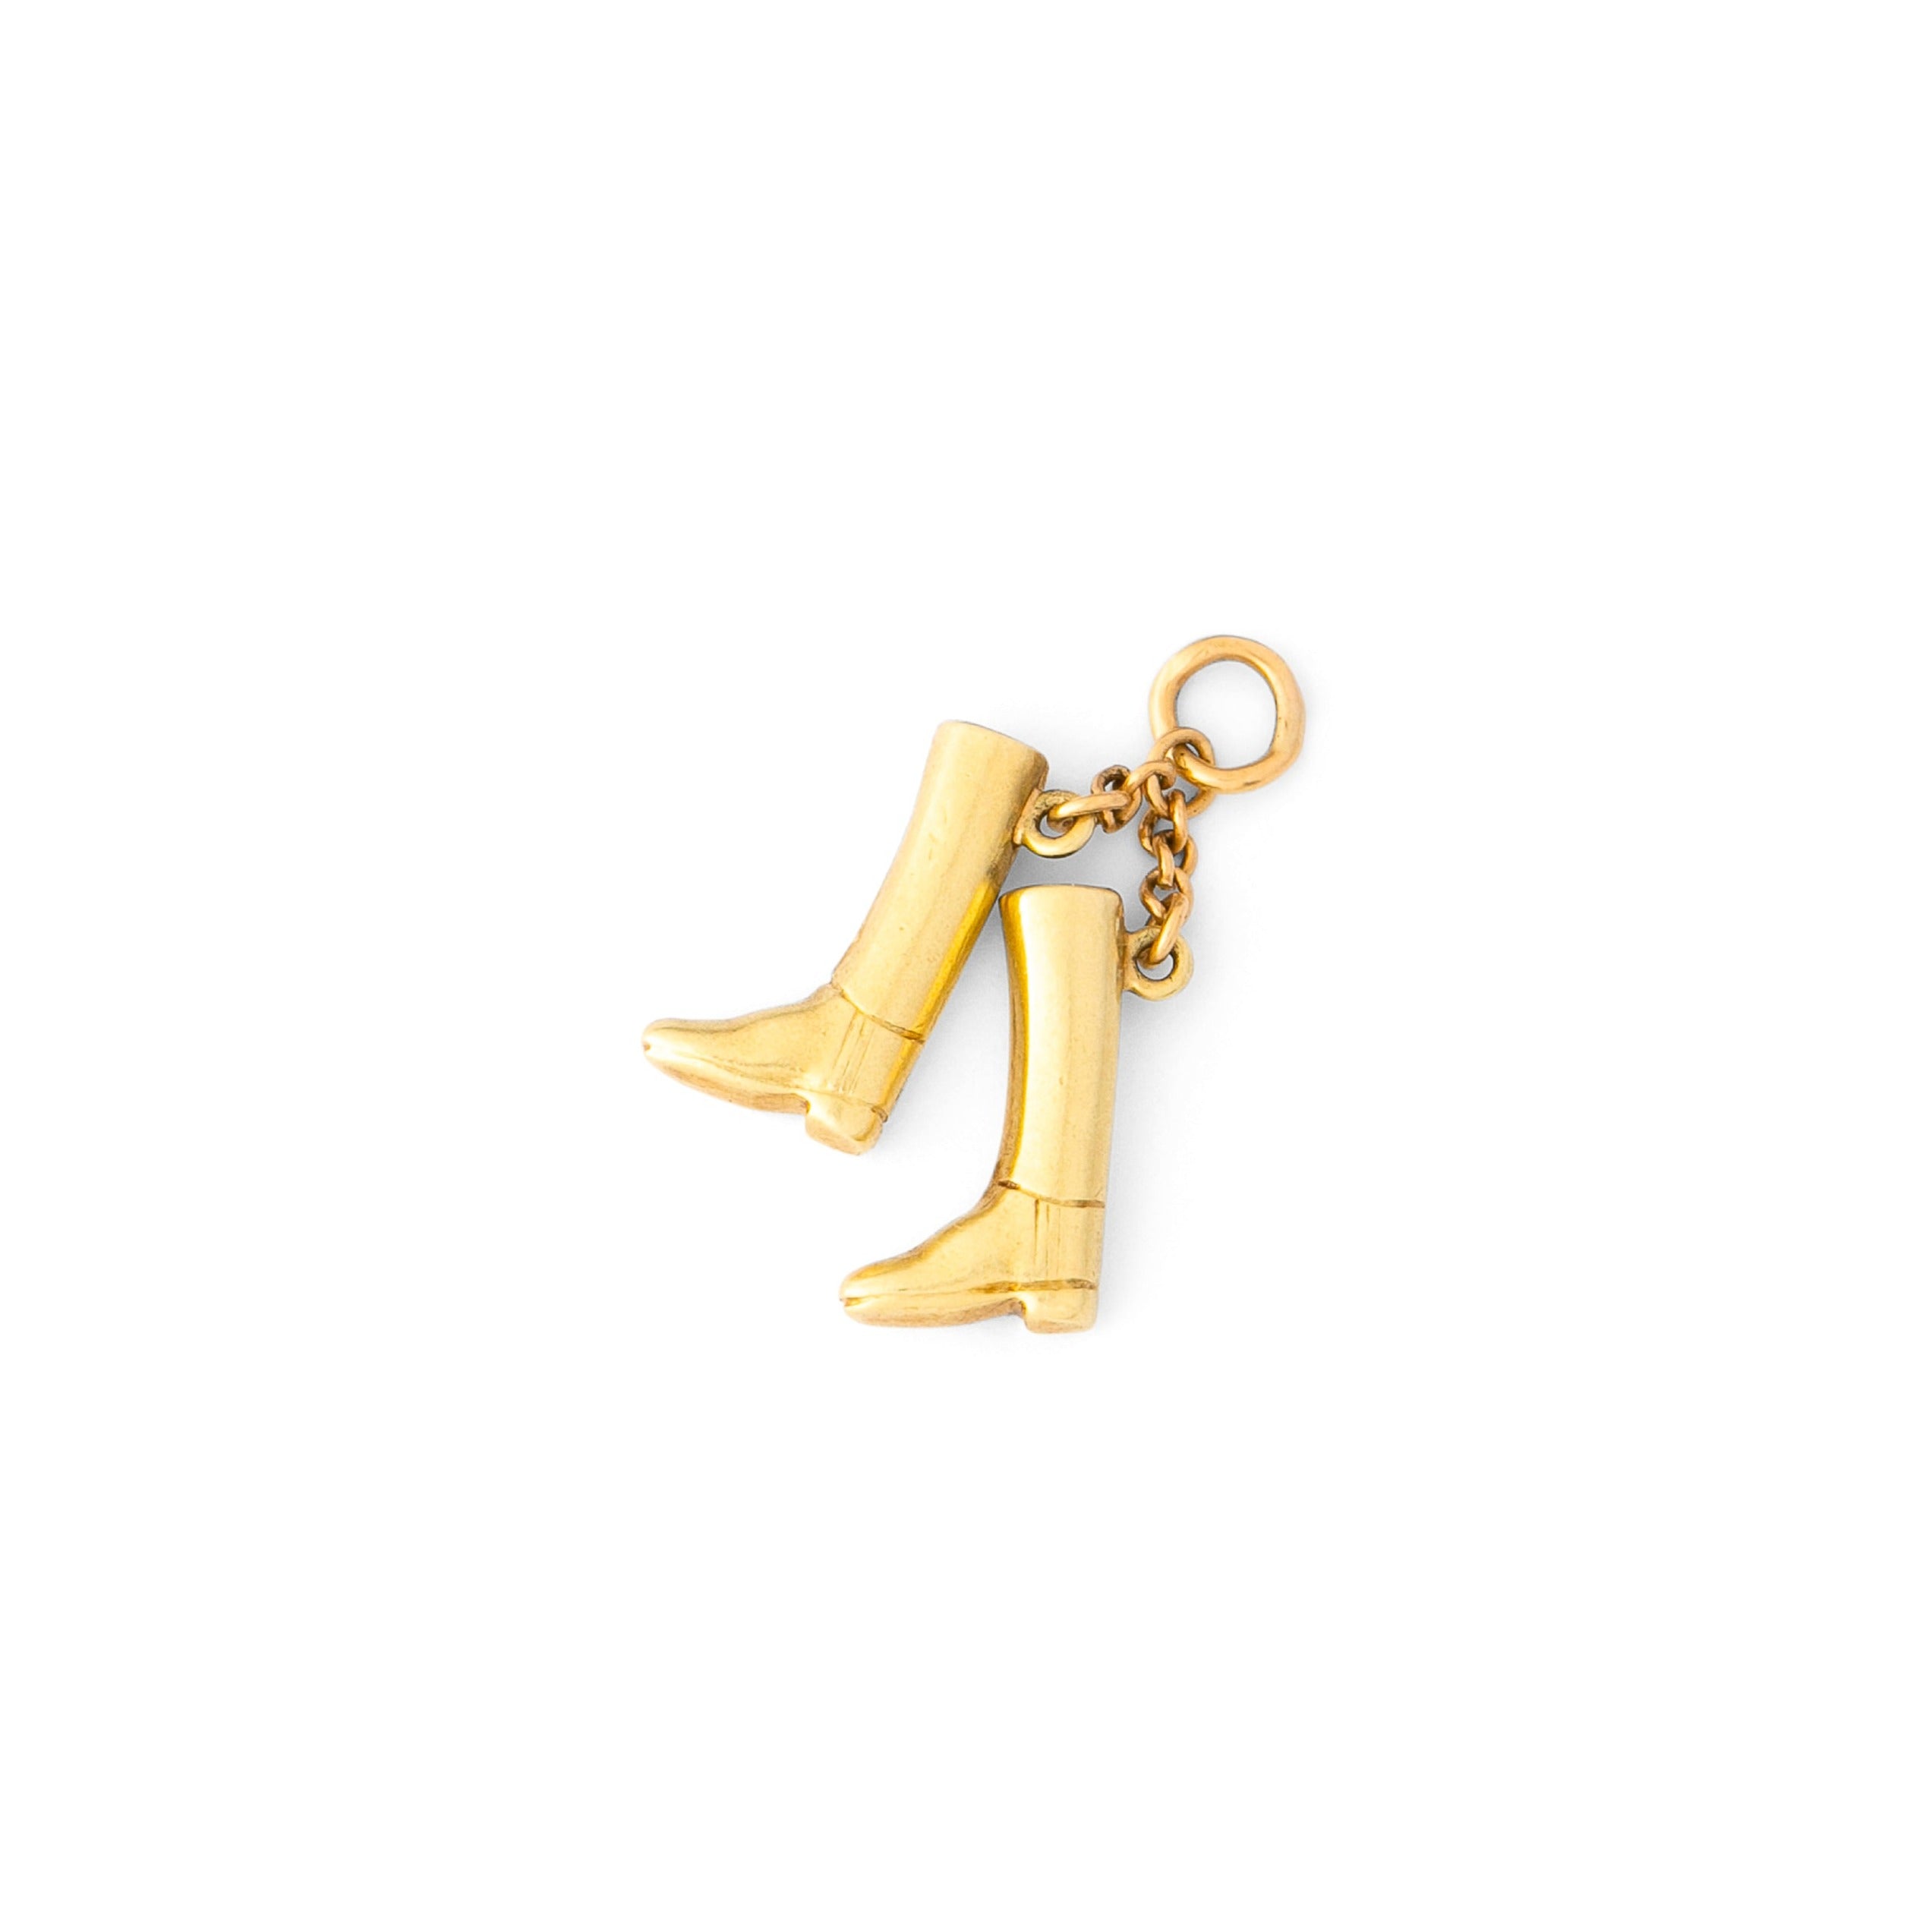 Pair of Boots 14k Gold Charm